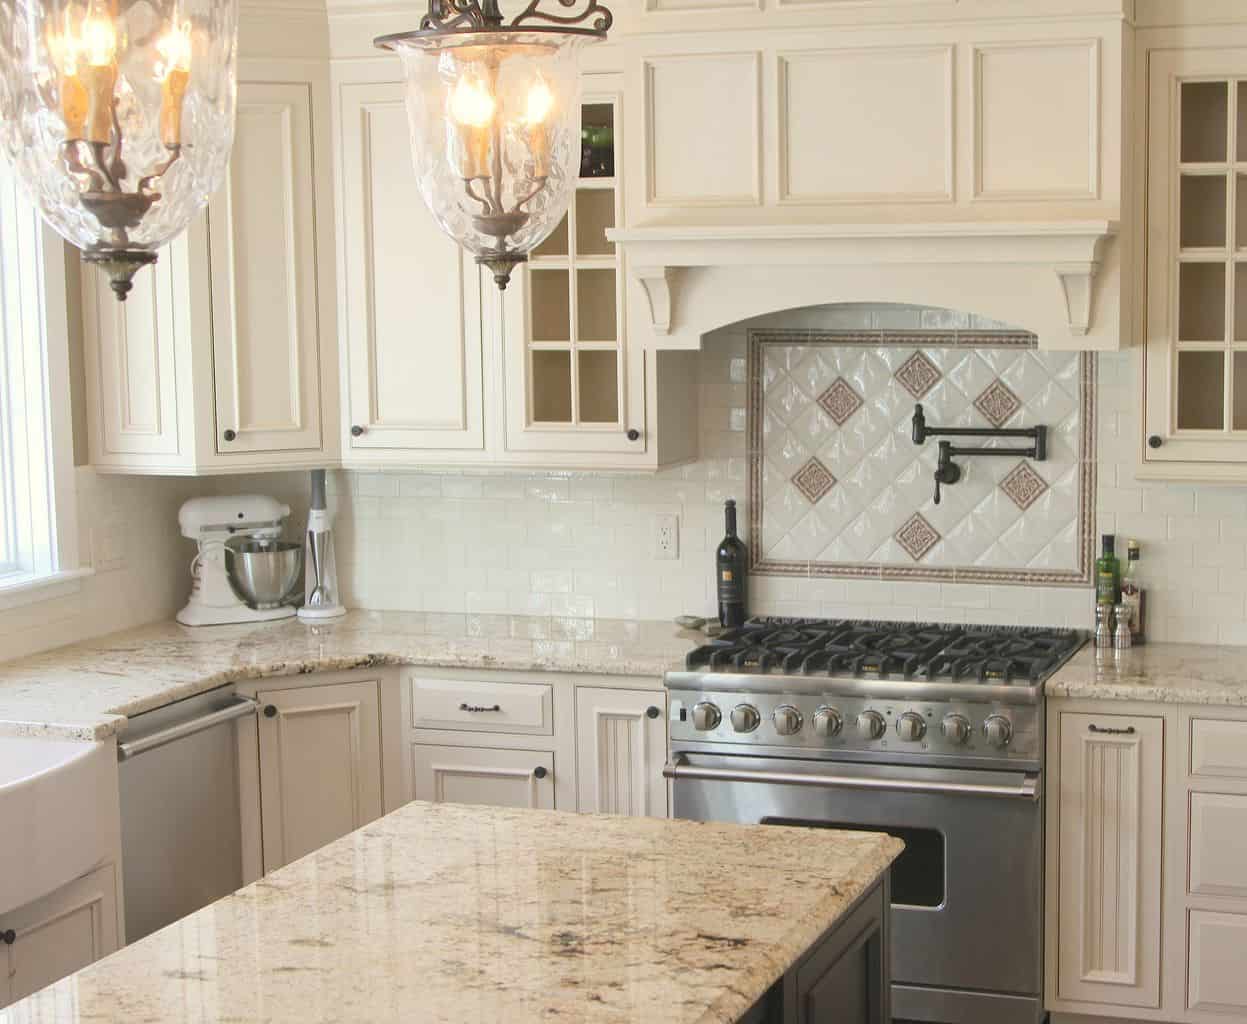 Top Taupe Paints For Your Kitchen Cabinets, What Color Paint Goes With Taupe Kitchen Cabinets